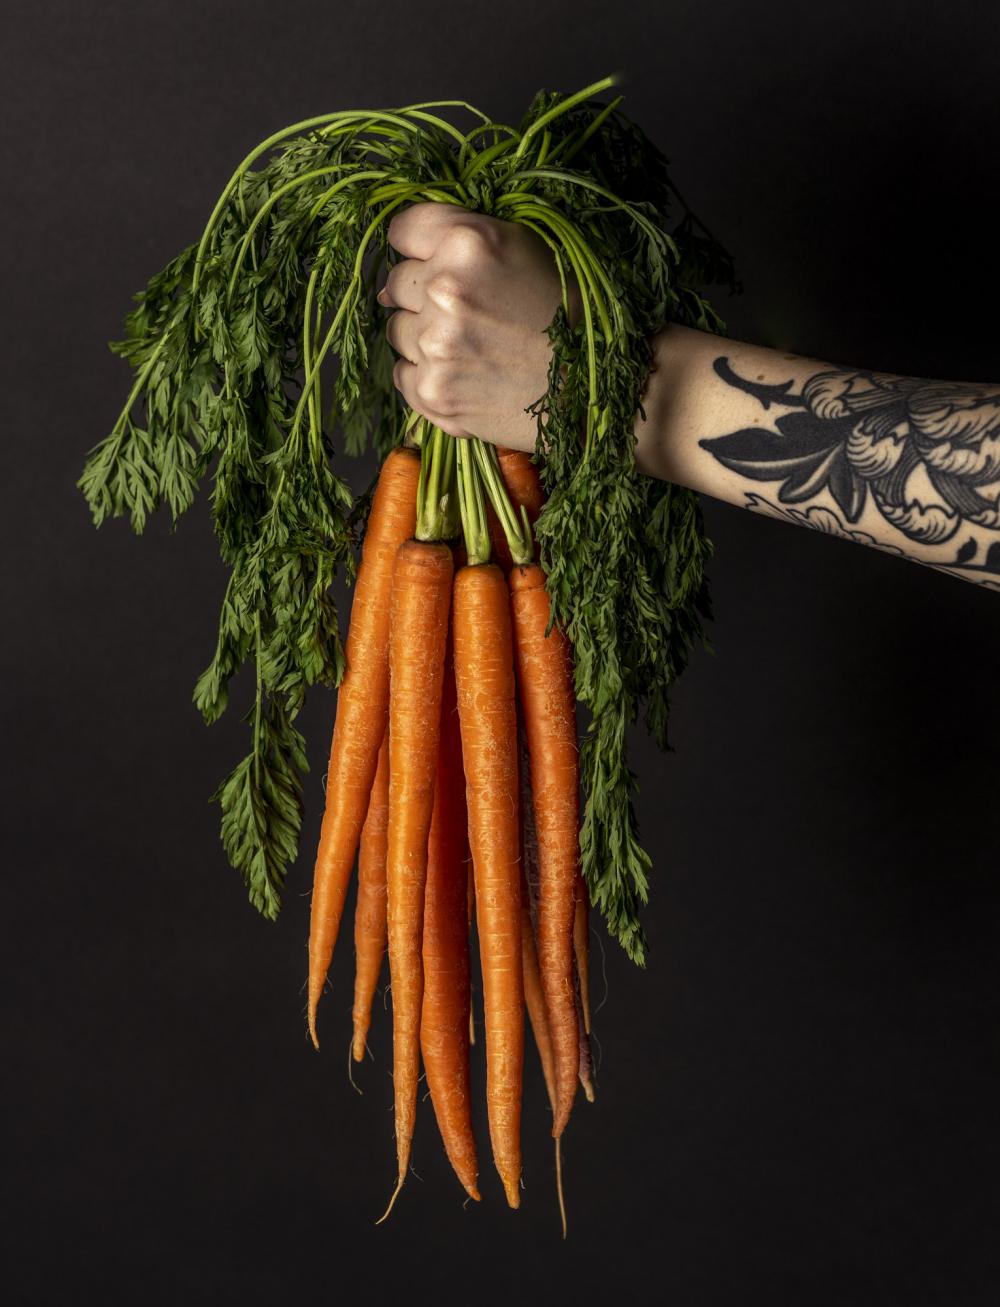 Photo of tattooed arm holding a bunch of carrots by the stems - photo by Mercedes Gania